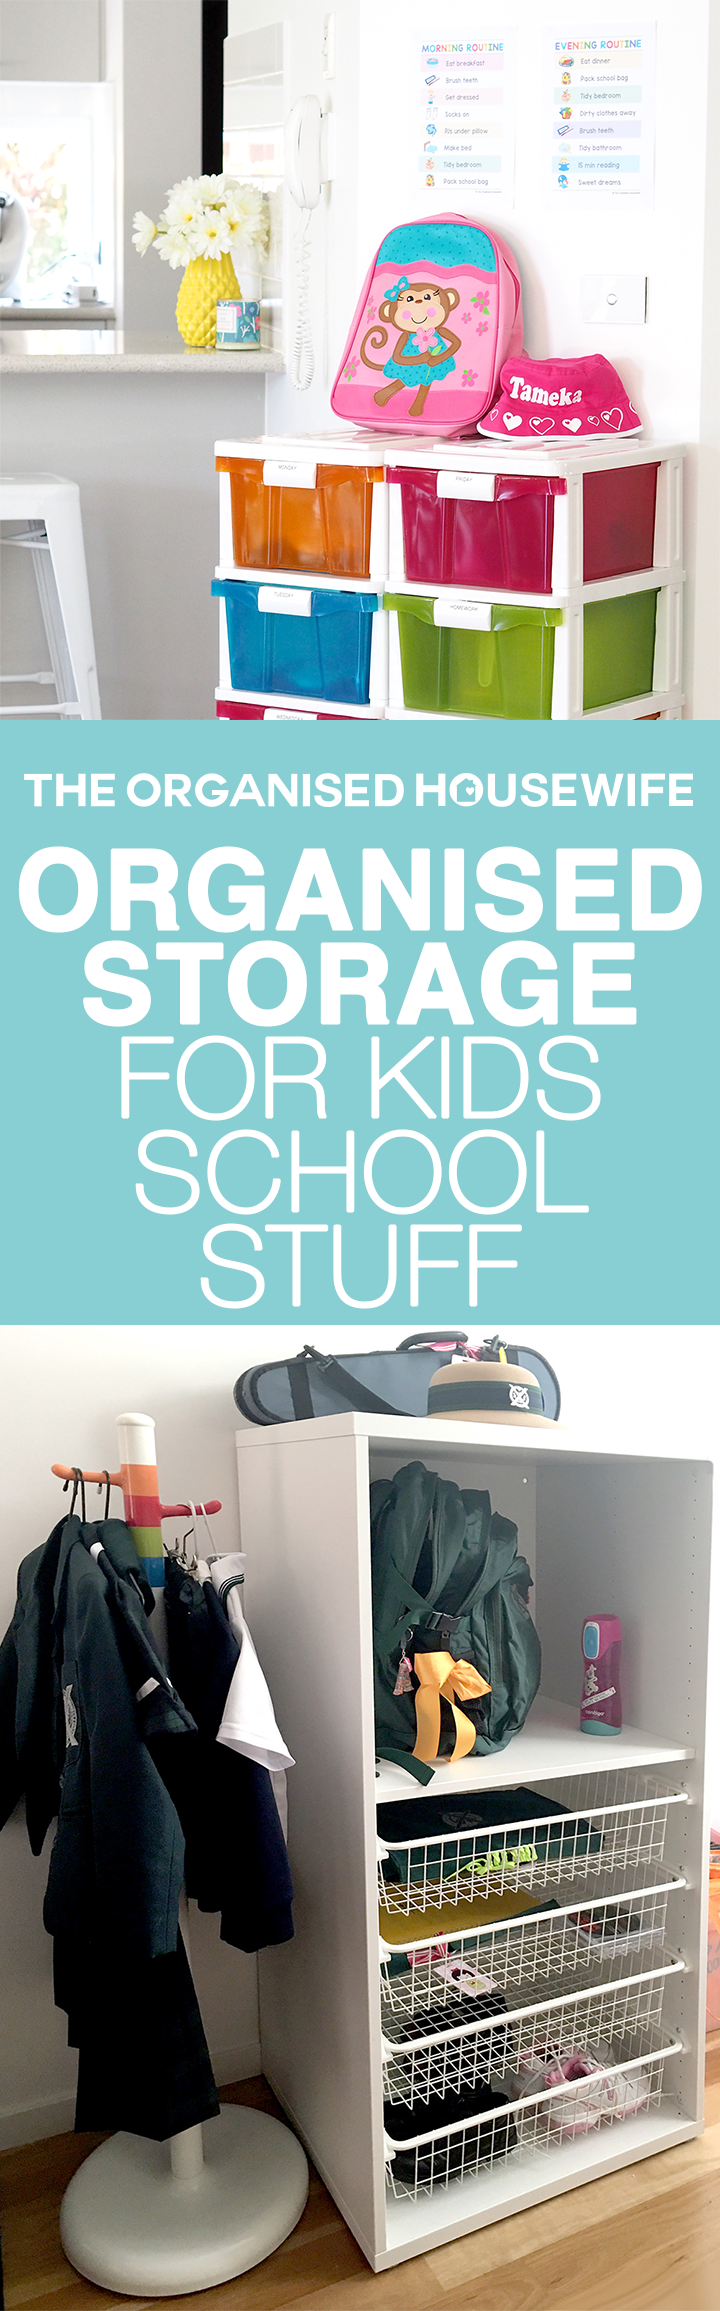 This is a fabulously organised storage unit for the kids school stuff, to keep everything in one place to help keep the school mornings stress free. 